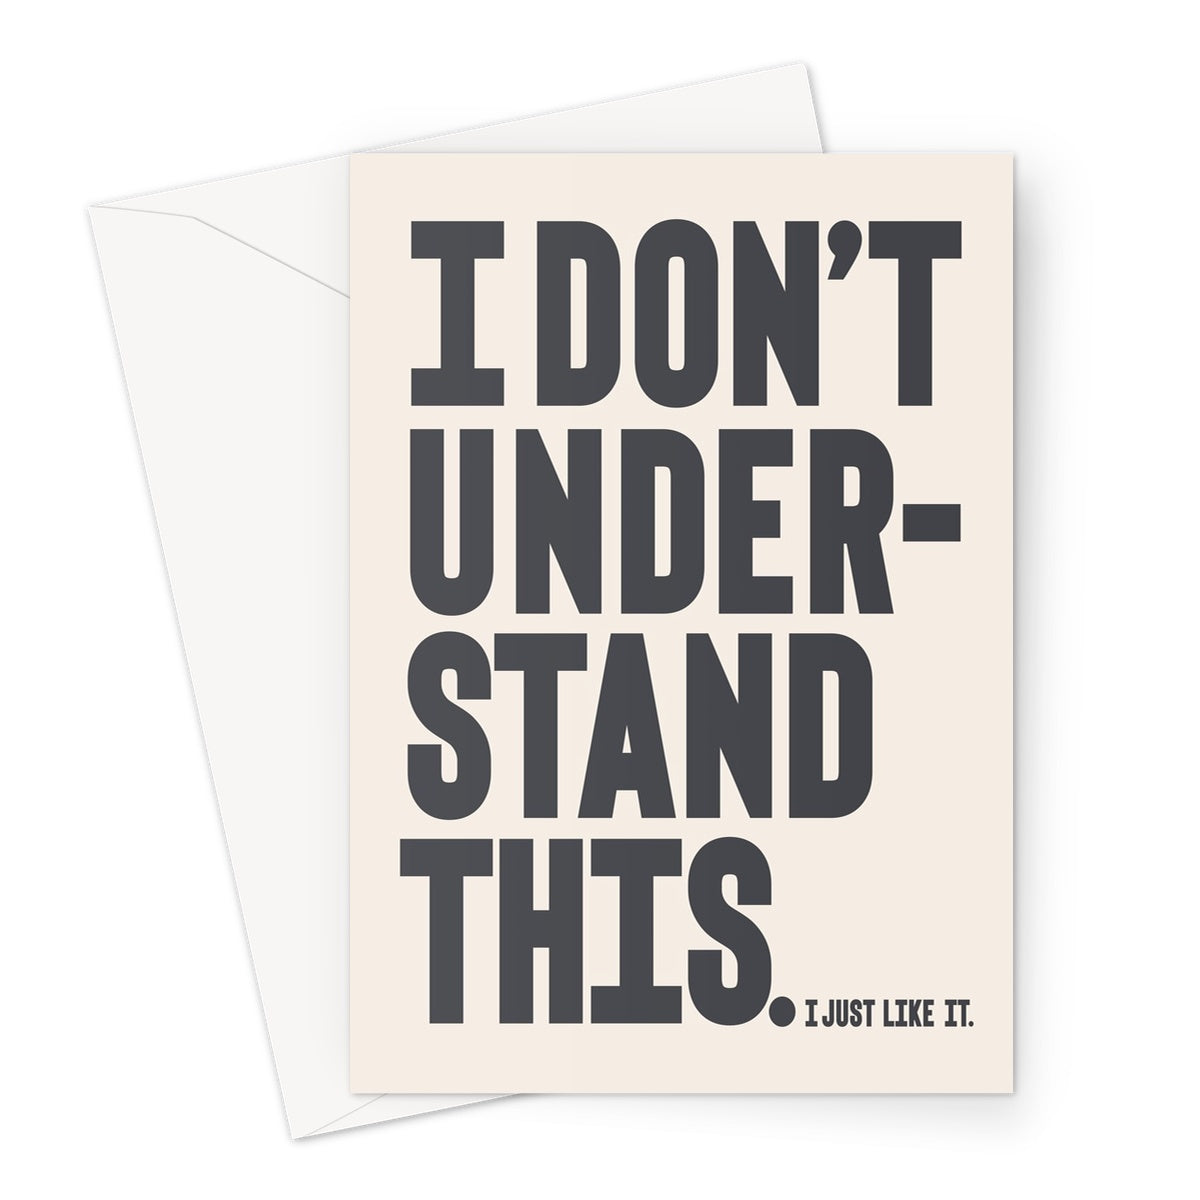 I DON'T UNDERSTAND - Stone / Charcoal Greeting Card